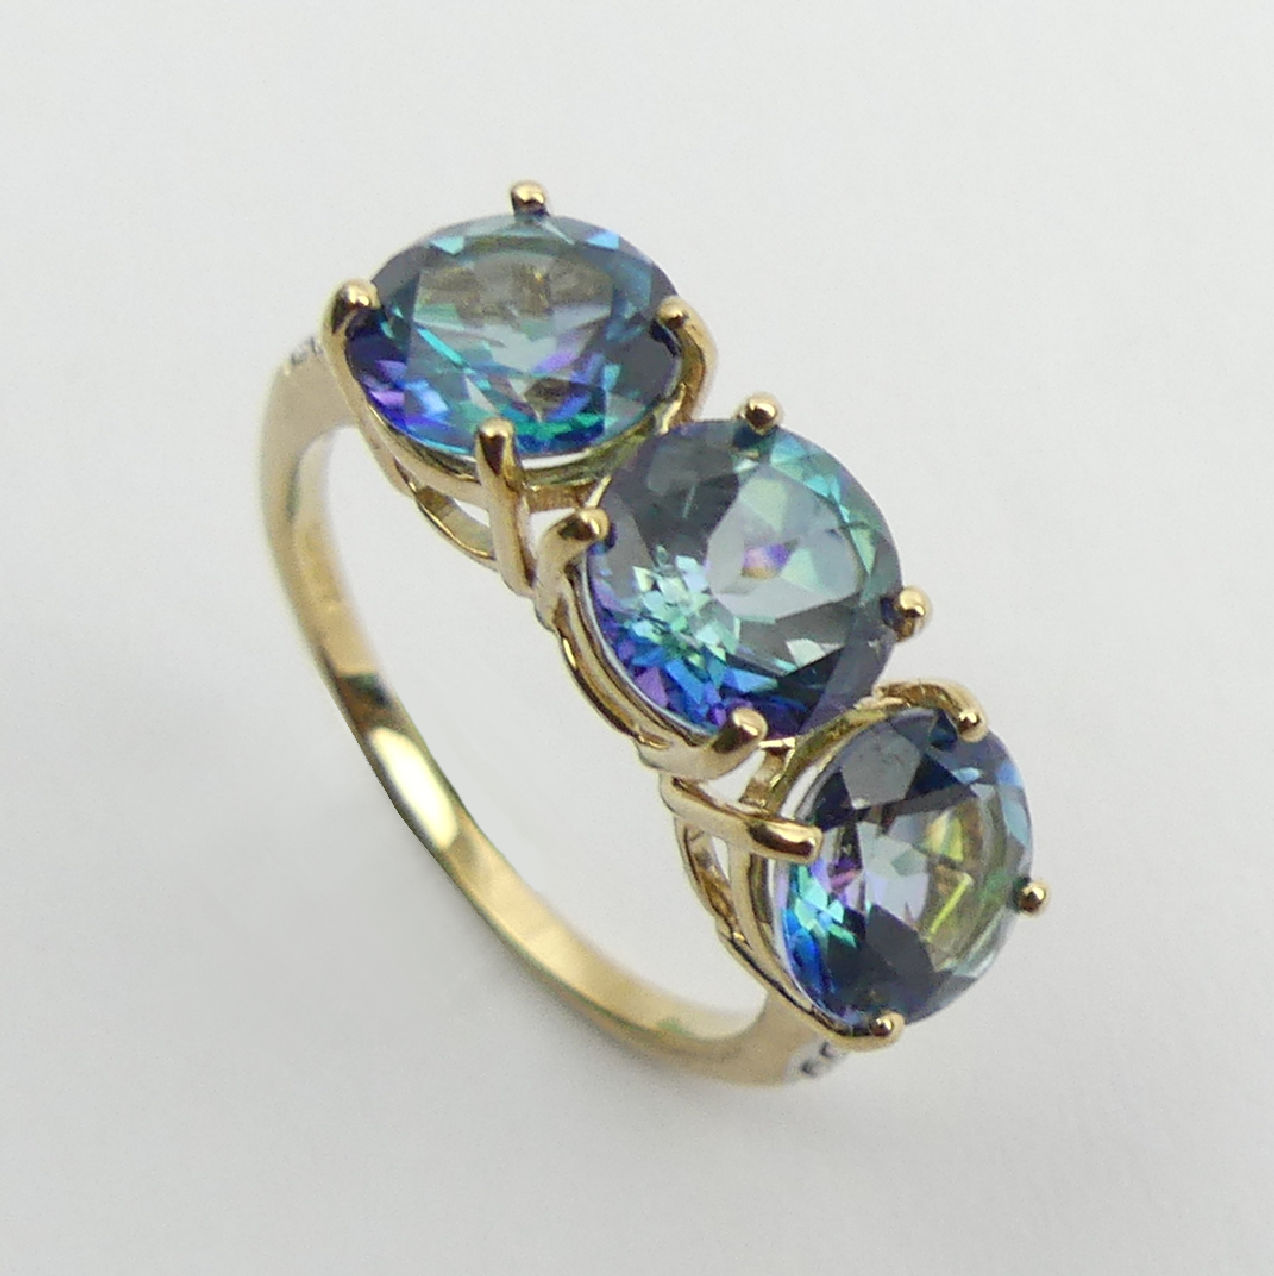 9ct gold mystic topaz and diamond ring, 3.2 grams, 7mm, size N. UK Postage £12.